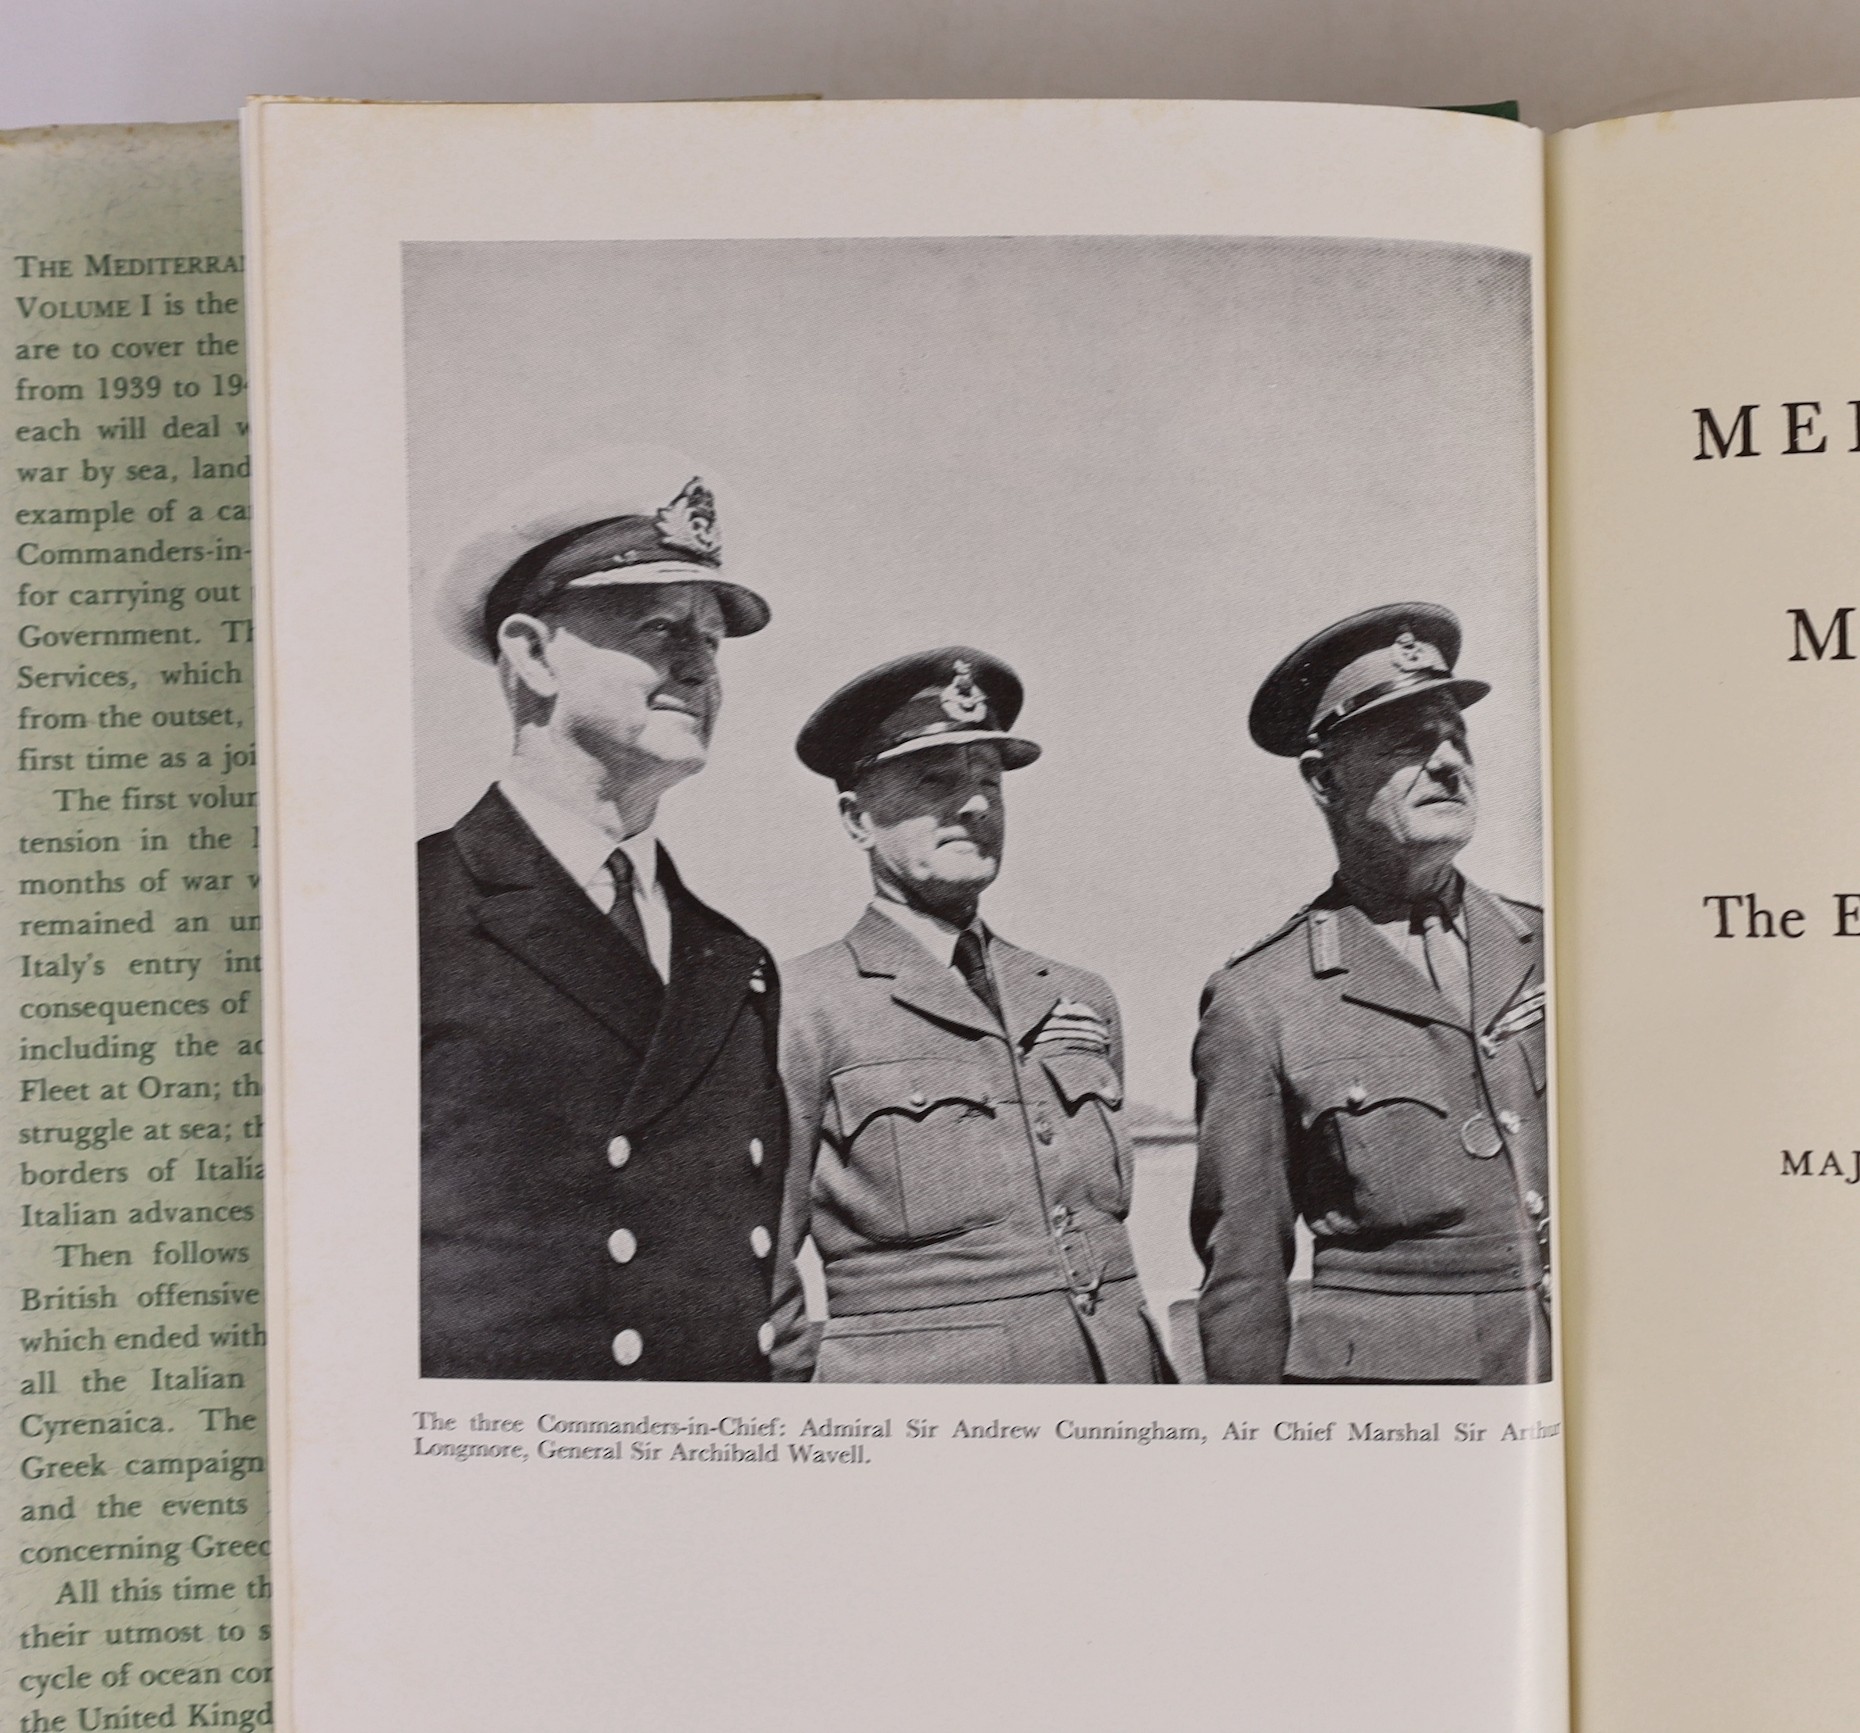 Playfair, S.O (Maj.-Gen) et al - History of the Second World War. The Mediterranean and the Middle East, 6 vols in 8, 8vo, cloth with d/j’s, 4 vols with library stickers to front fly leaves, HMSO, London, 1954-1988